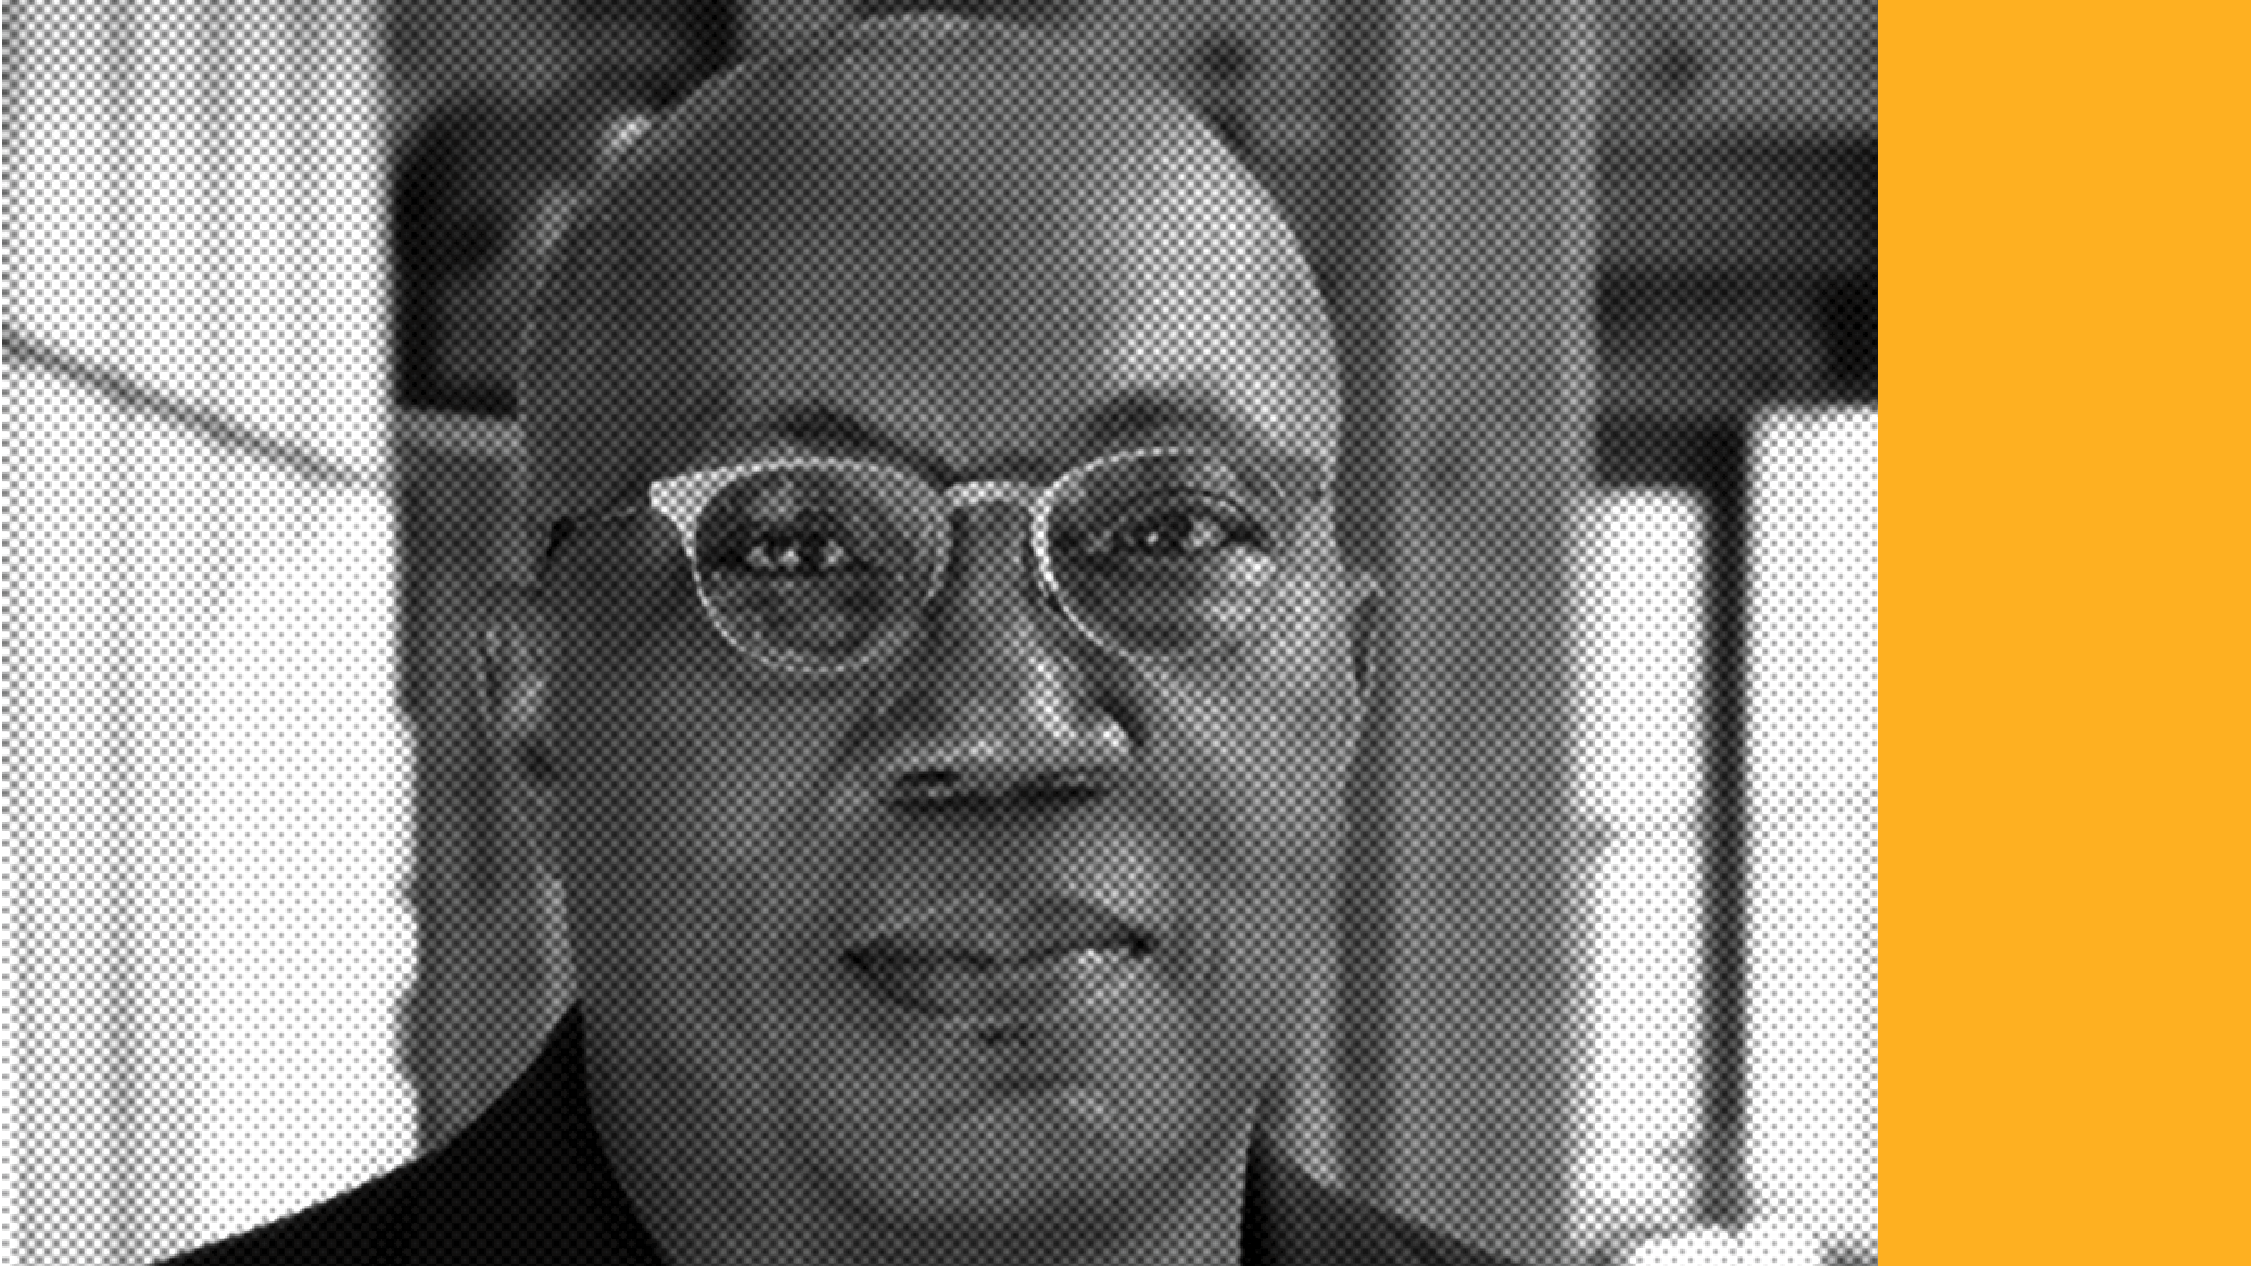 Headshot of a smiling person of dark skin tone, who is bald and wearing light framed glasses.